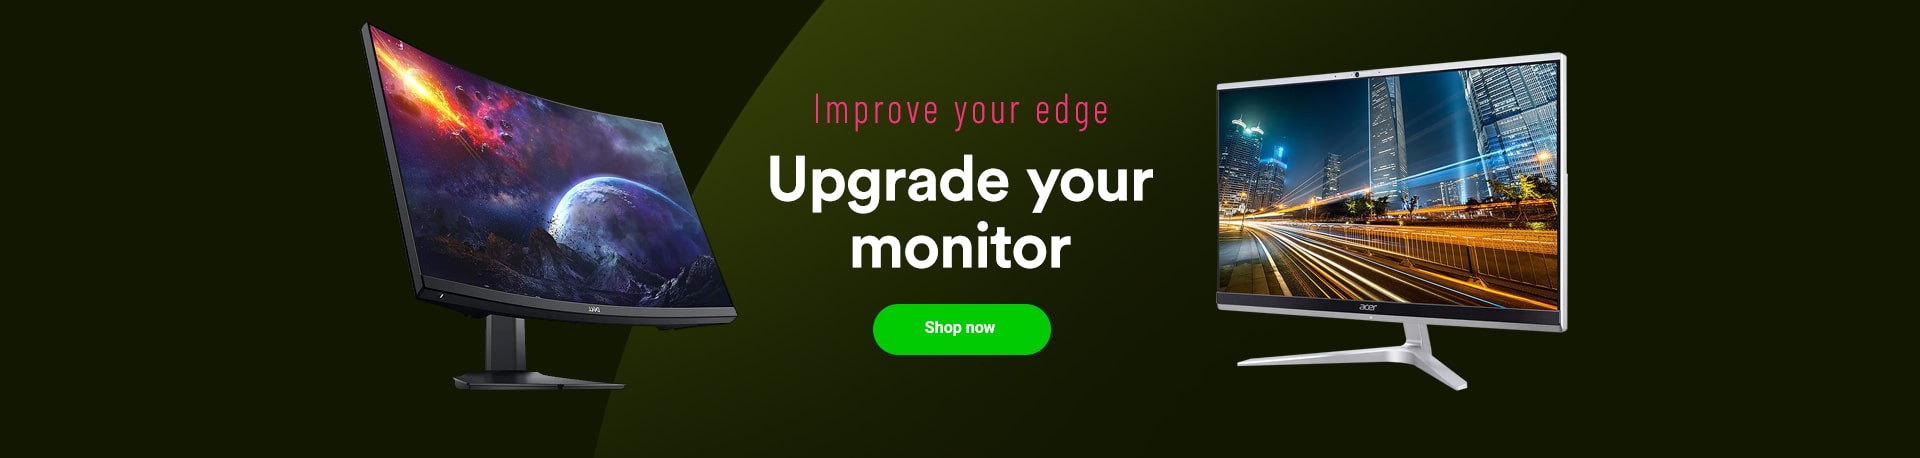 Homepage - Upgrade your monitor